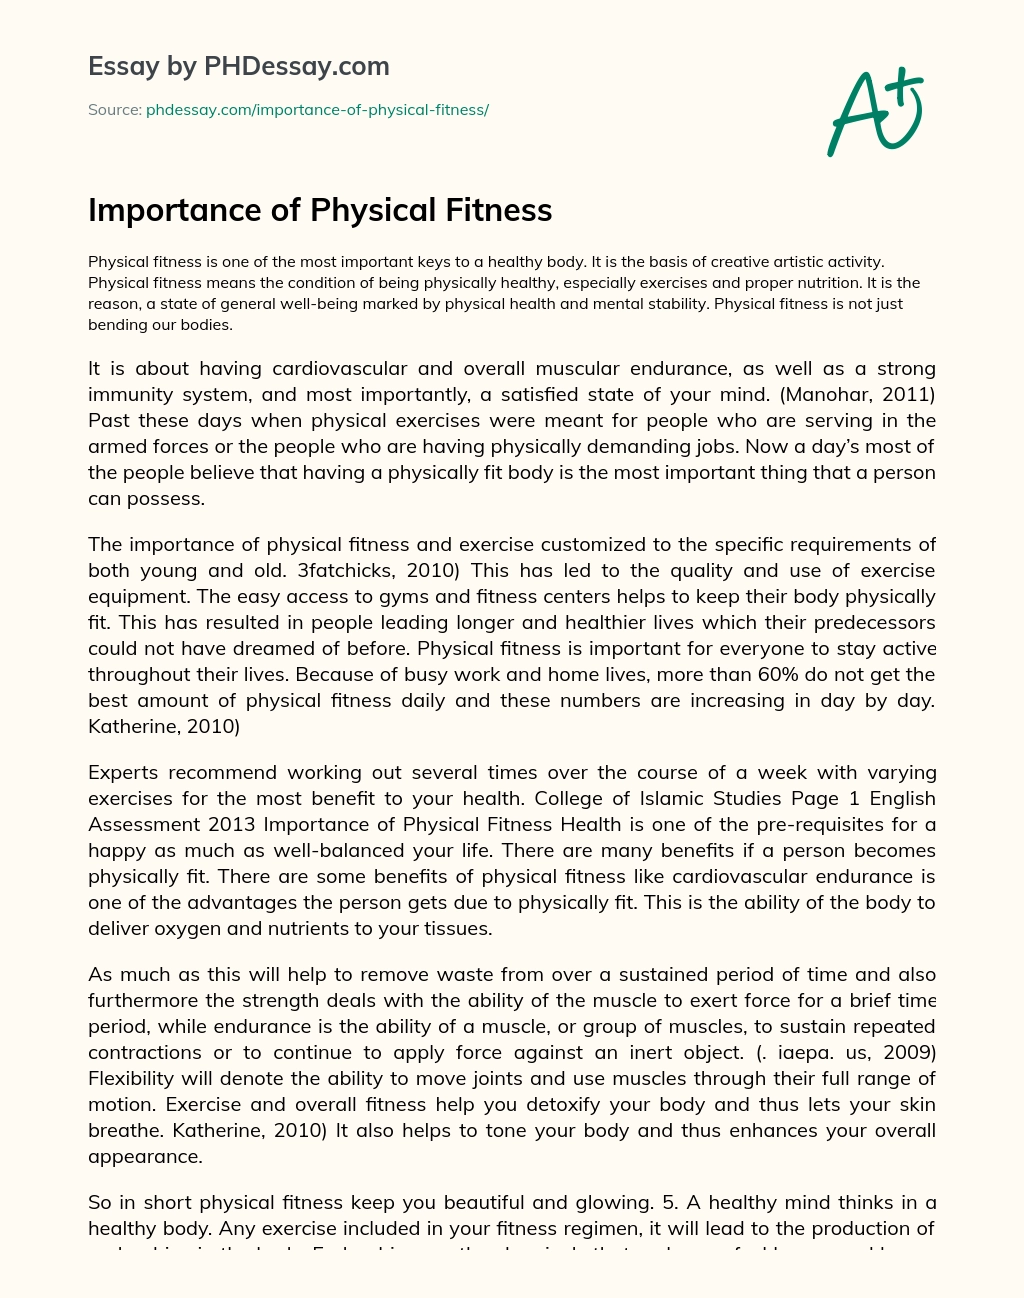 Importance of Physical Fitness essay